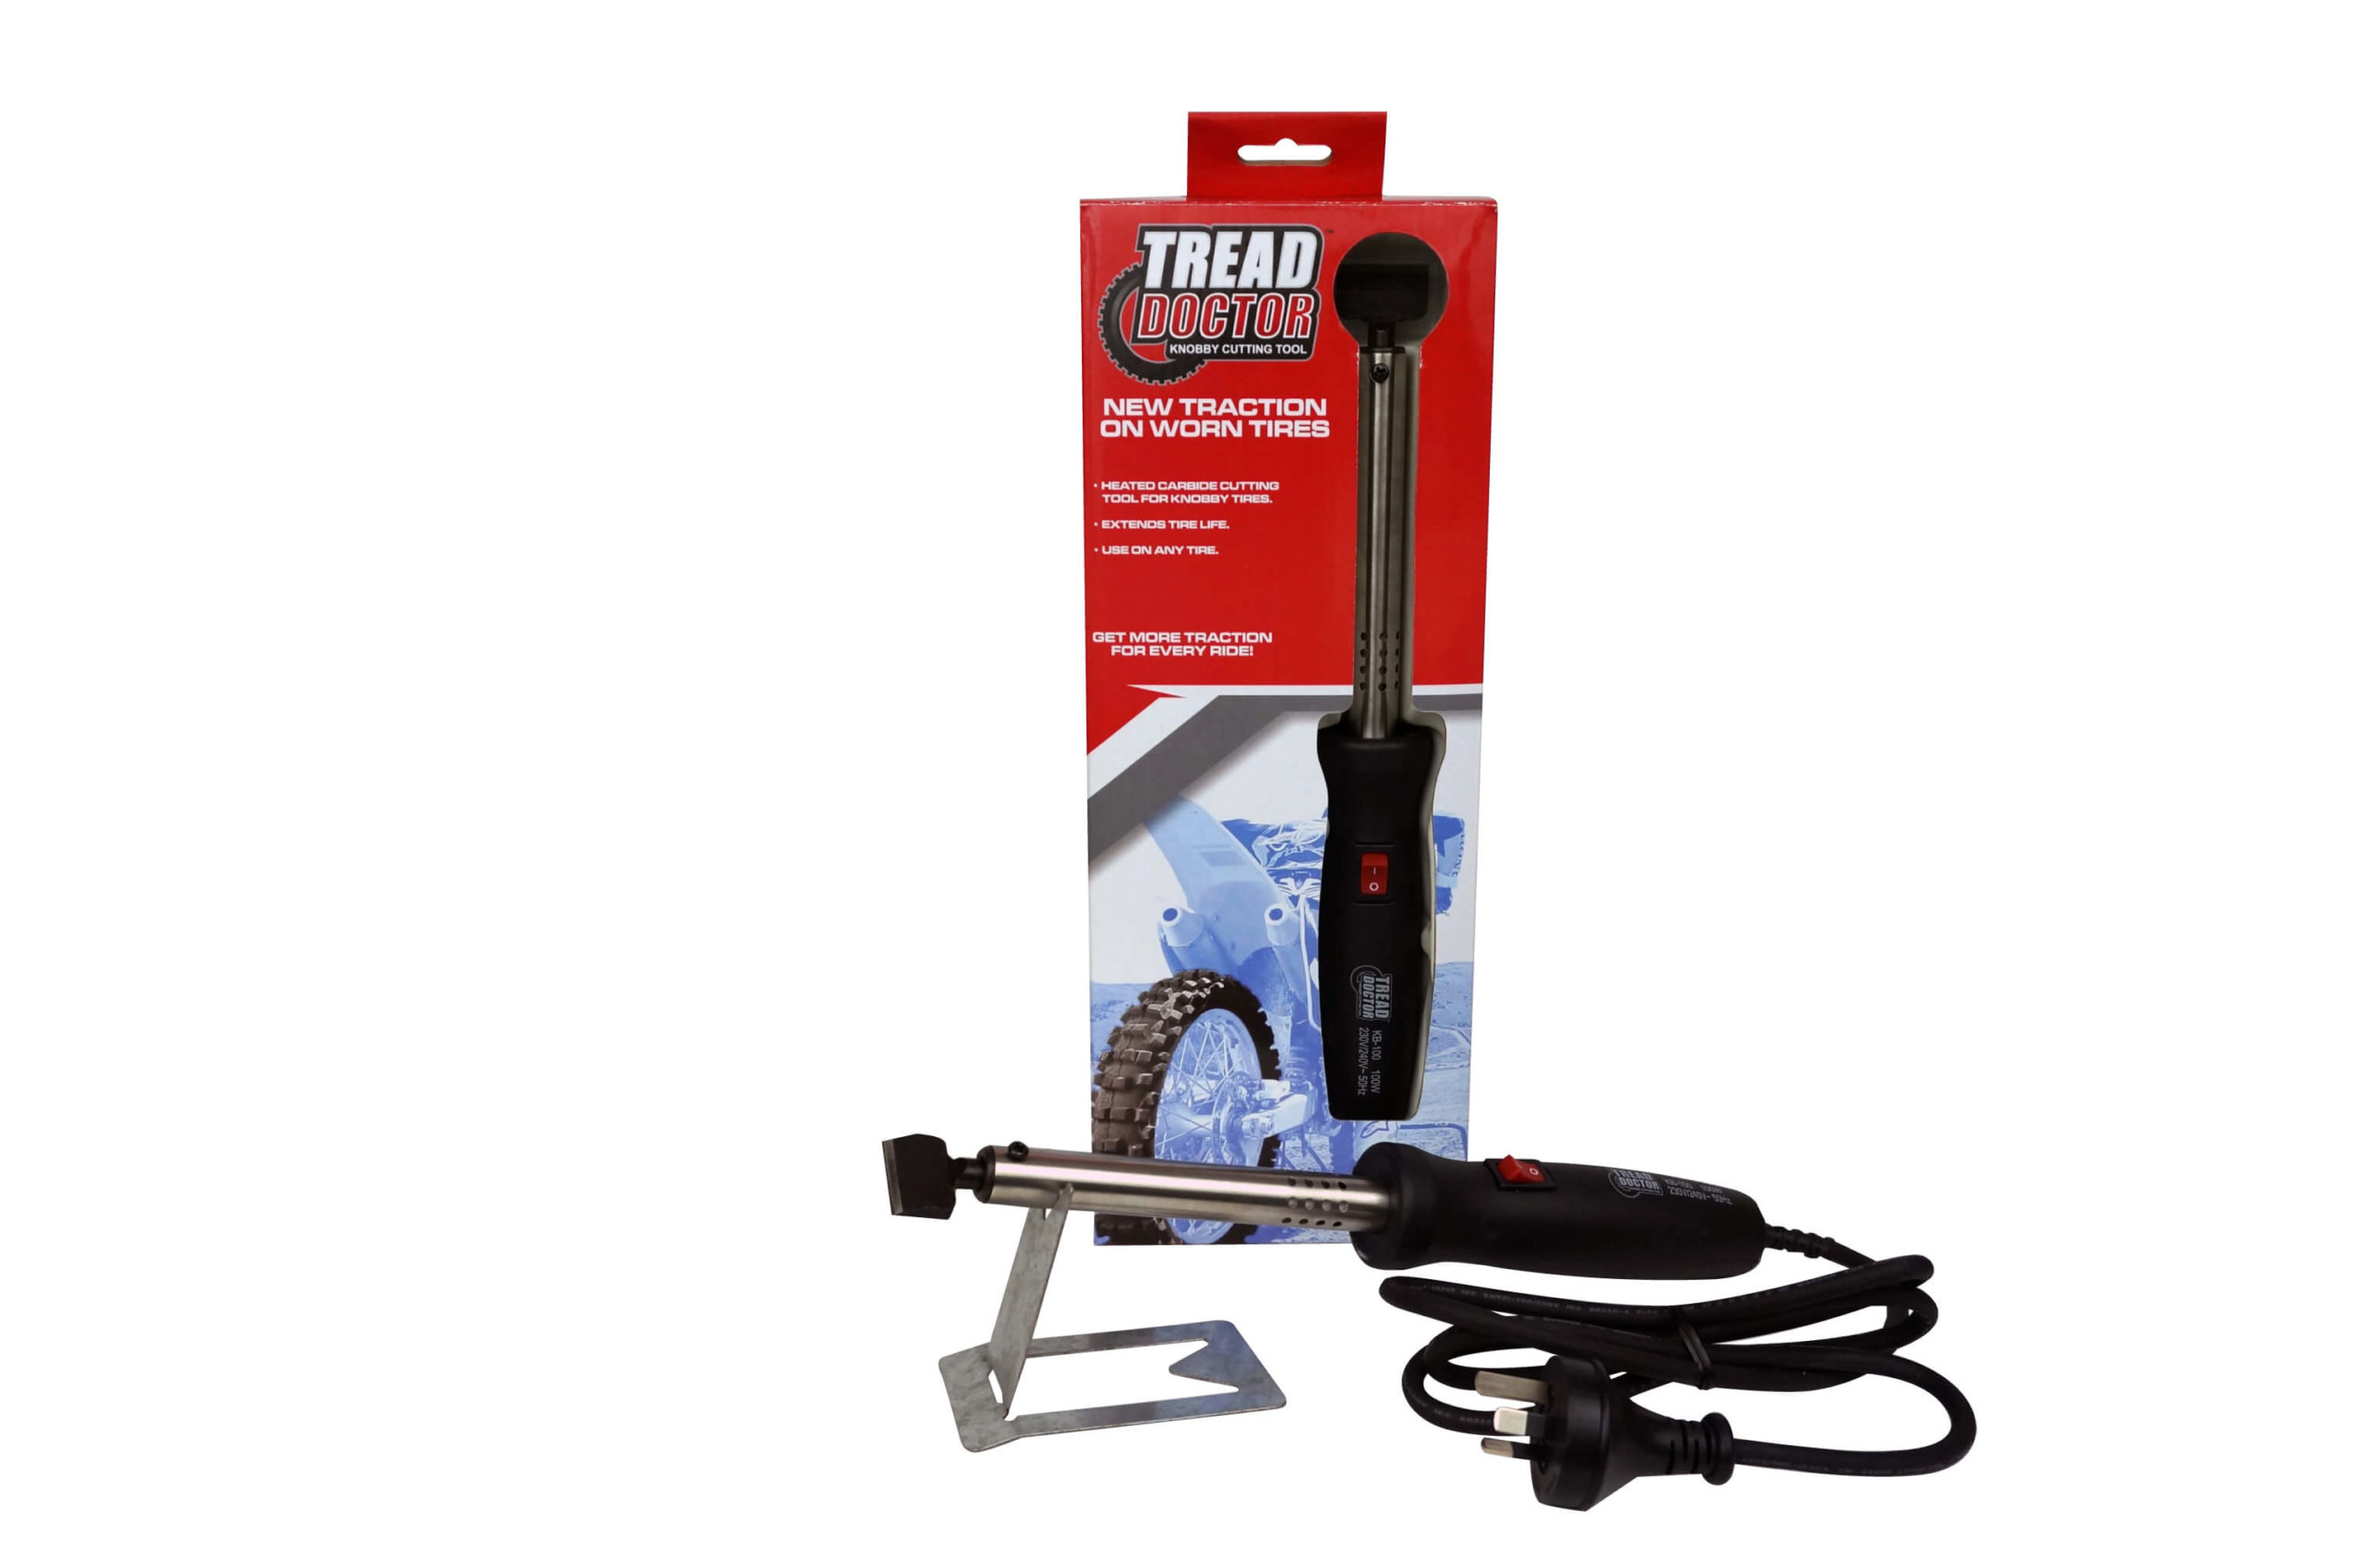 Tread Doctor Tire Groover & Cutter